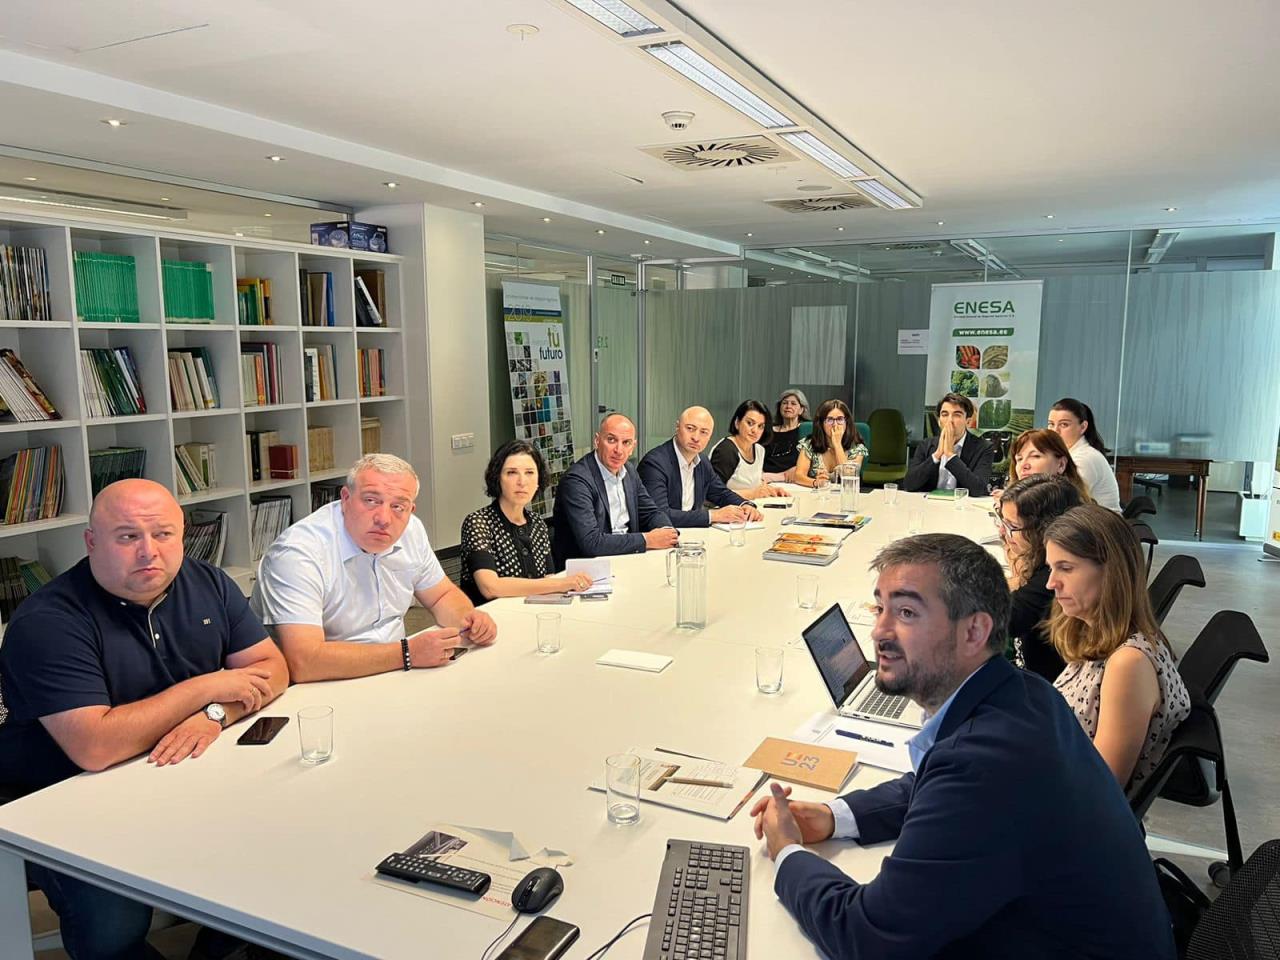 The delegation of the Rural Development Agency was on a working visit to the Kingdom of Spain within the framework of the "Modernization of Vocational Education in Georgian Agriculture (VET)" project